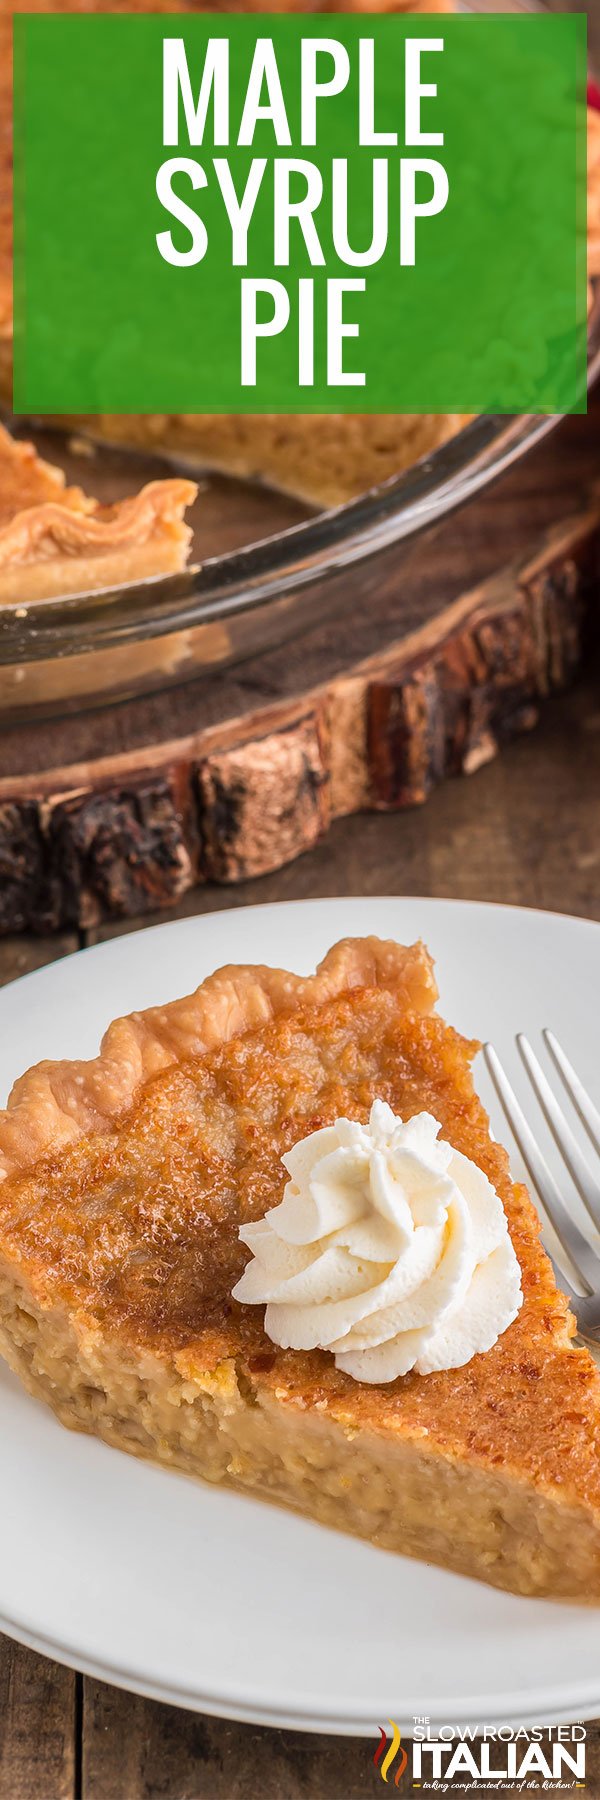 Maple Syrup Pie - PIN